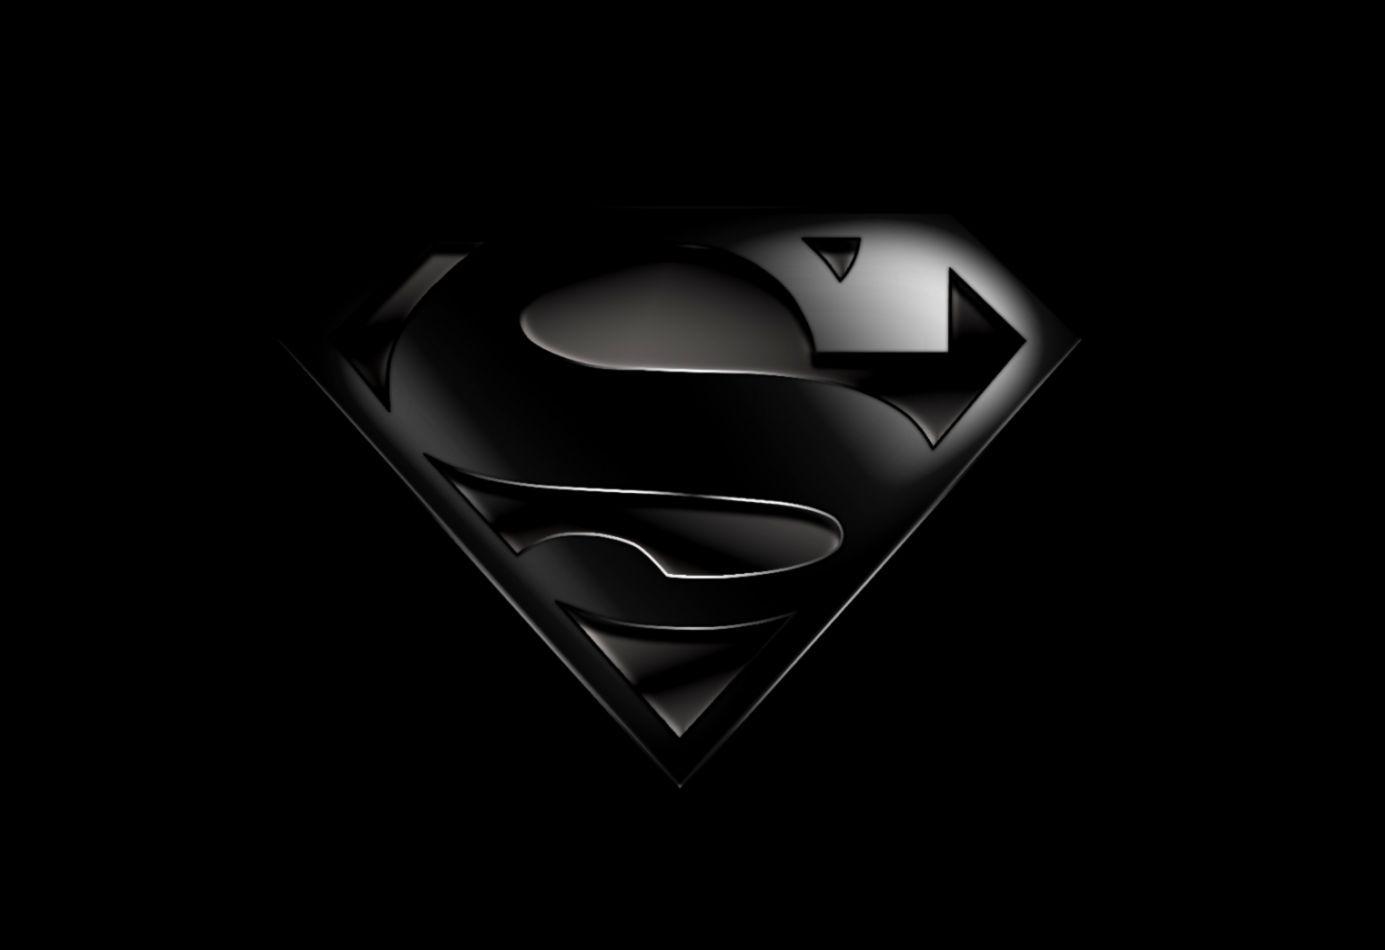 new superman symbol in black and white